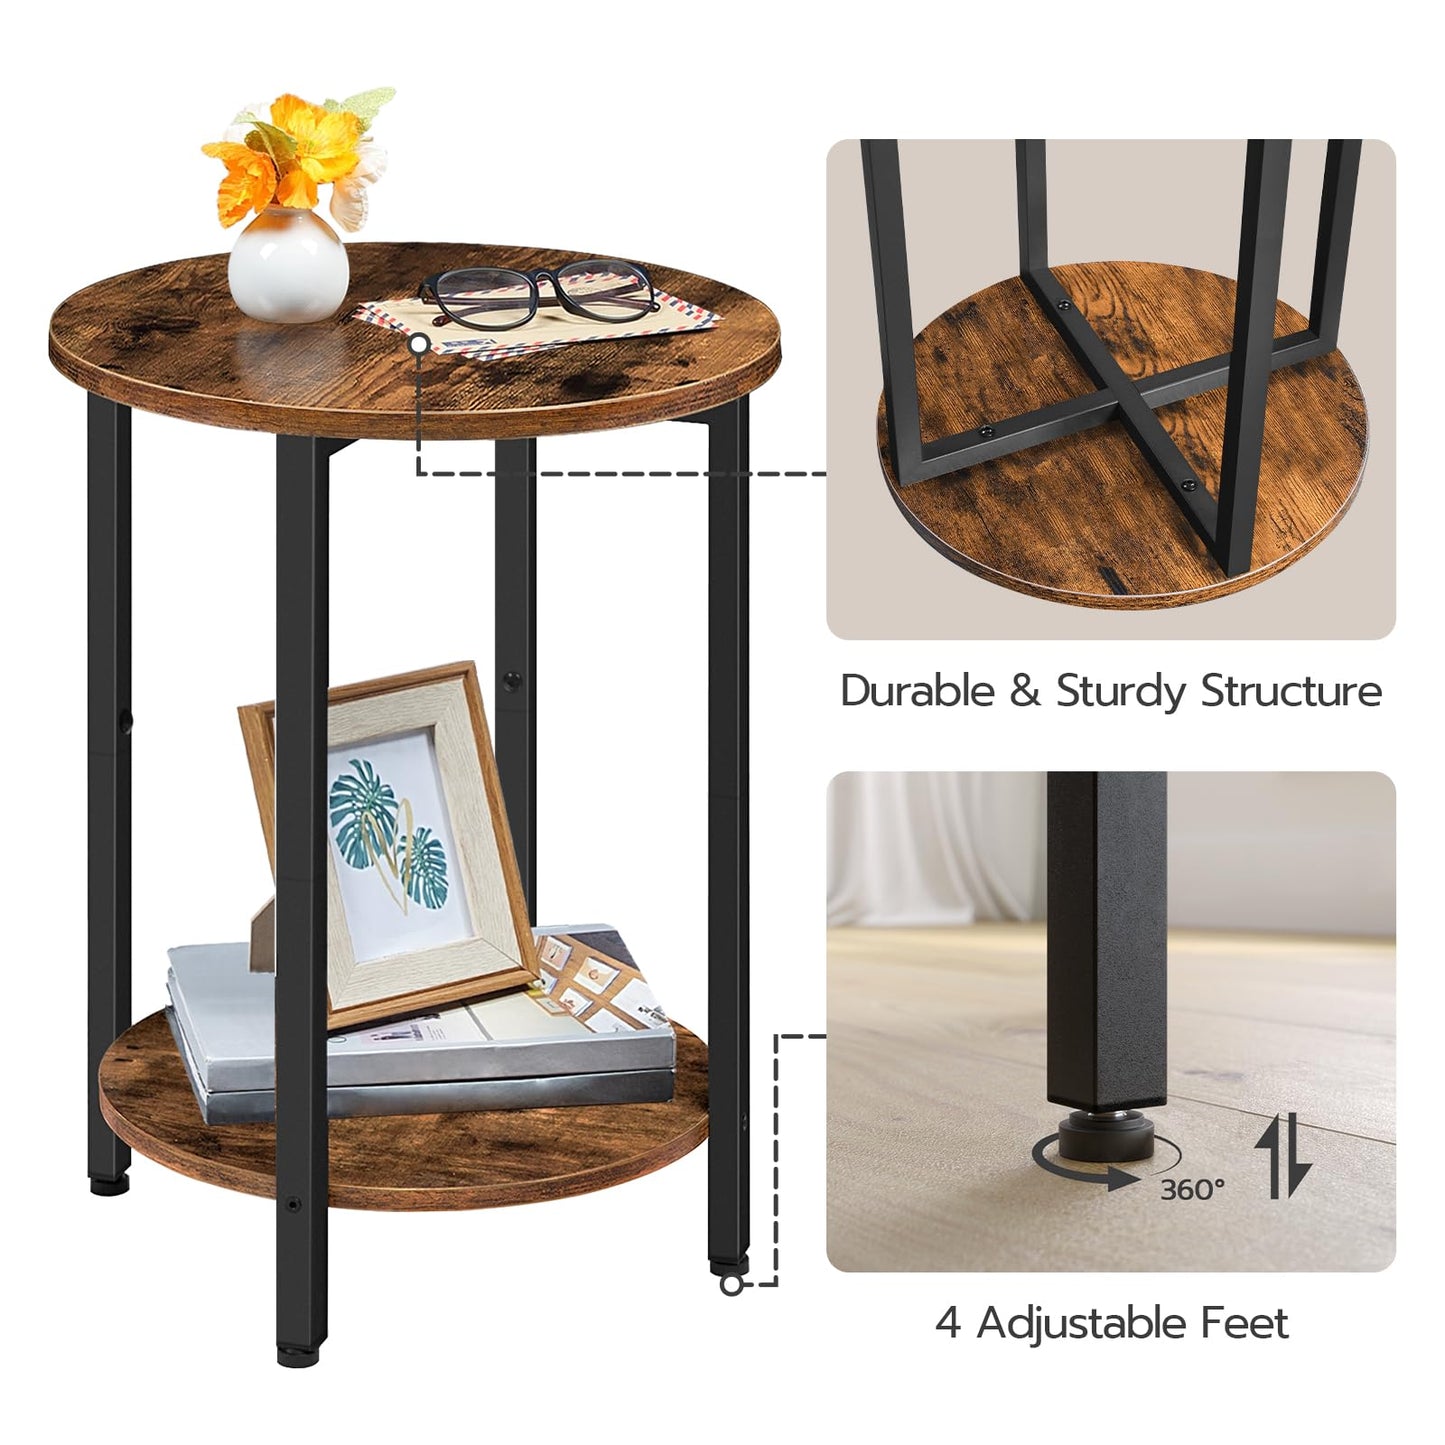 HOOBRO Side Table, Round Sofa Couch Table with Storage Shelf, 2-Tier Industrial End Table, Stable Metal Frame, Wooden Look Accent Table for Small Spaces, Living Room, Bedroom, Rustic Brown BF58BZ01G1